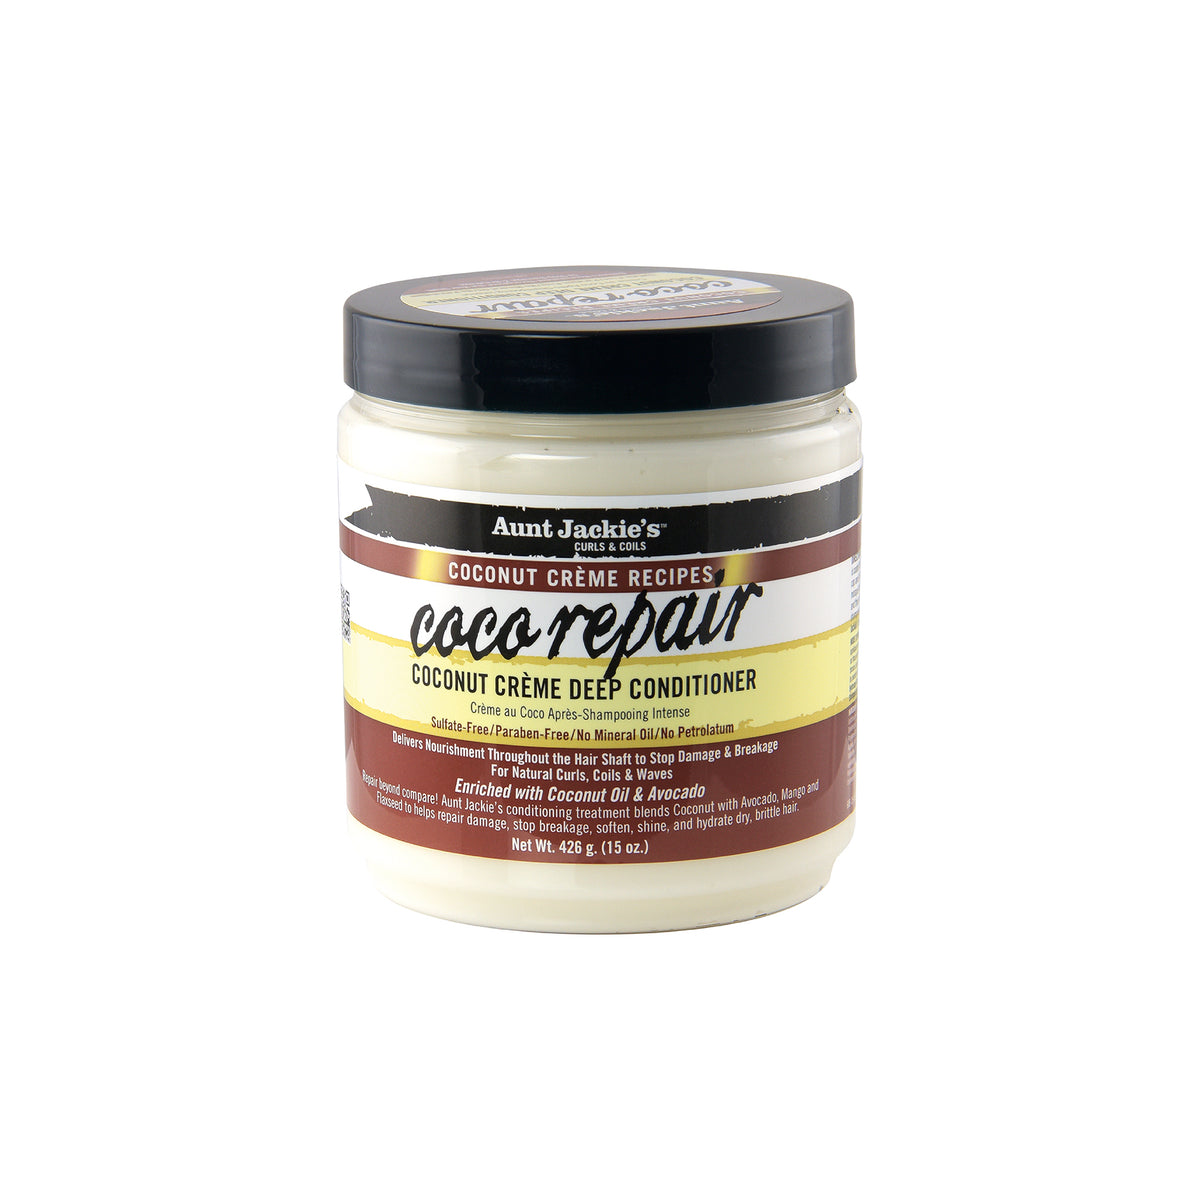 Aunt Jackie's Coconut Cr?me Recipes Coco Repair Deep Hair Conditioner, Delivers Nourishment, Stops Damage, Breakage for Natural Curls, 15 oz 15 Ounce (Pack of 1) Coco Repair